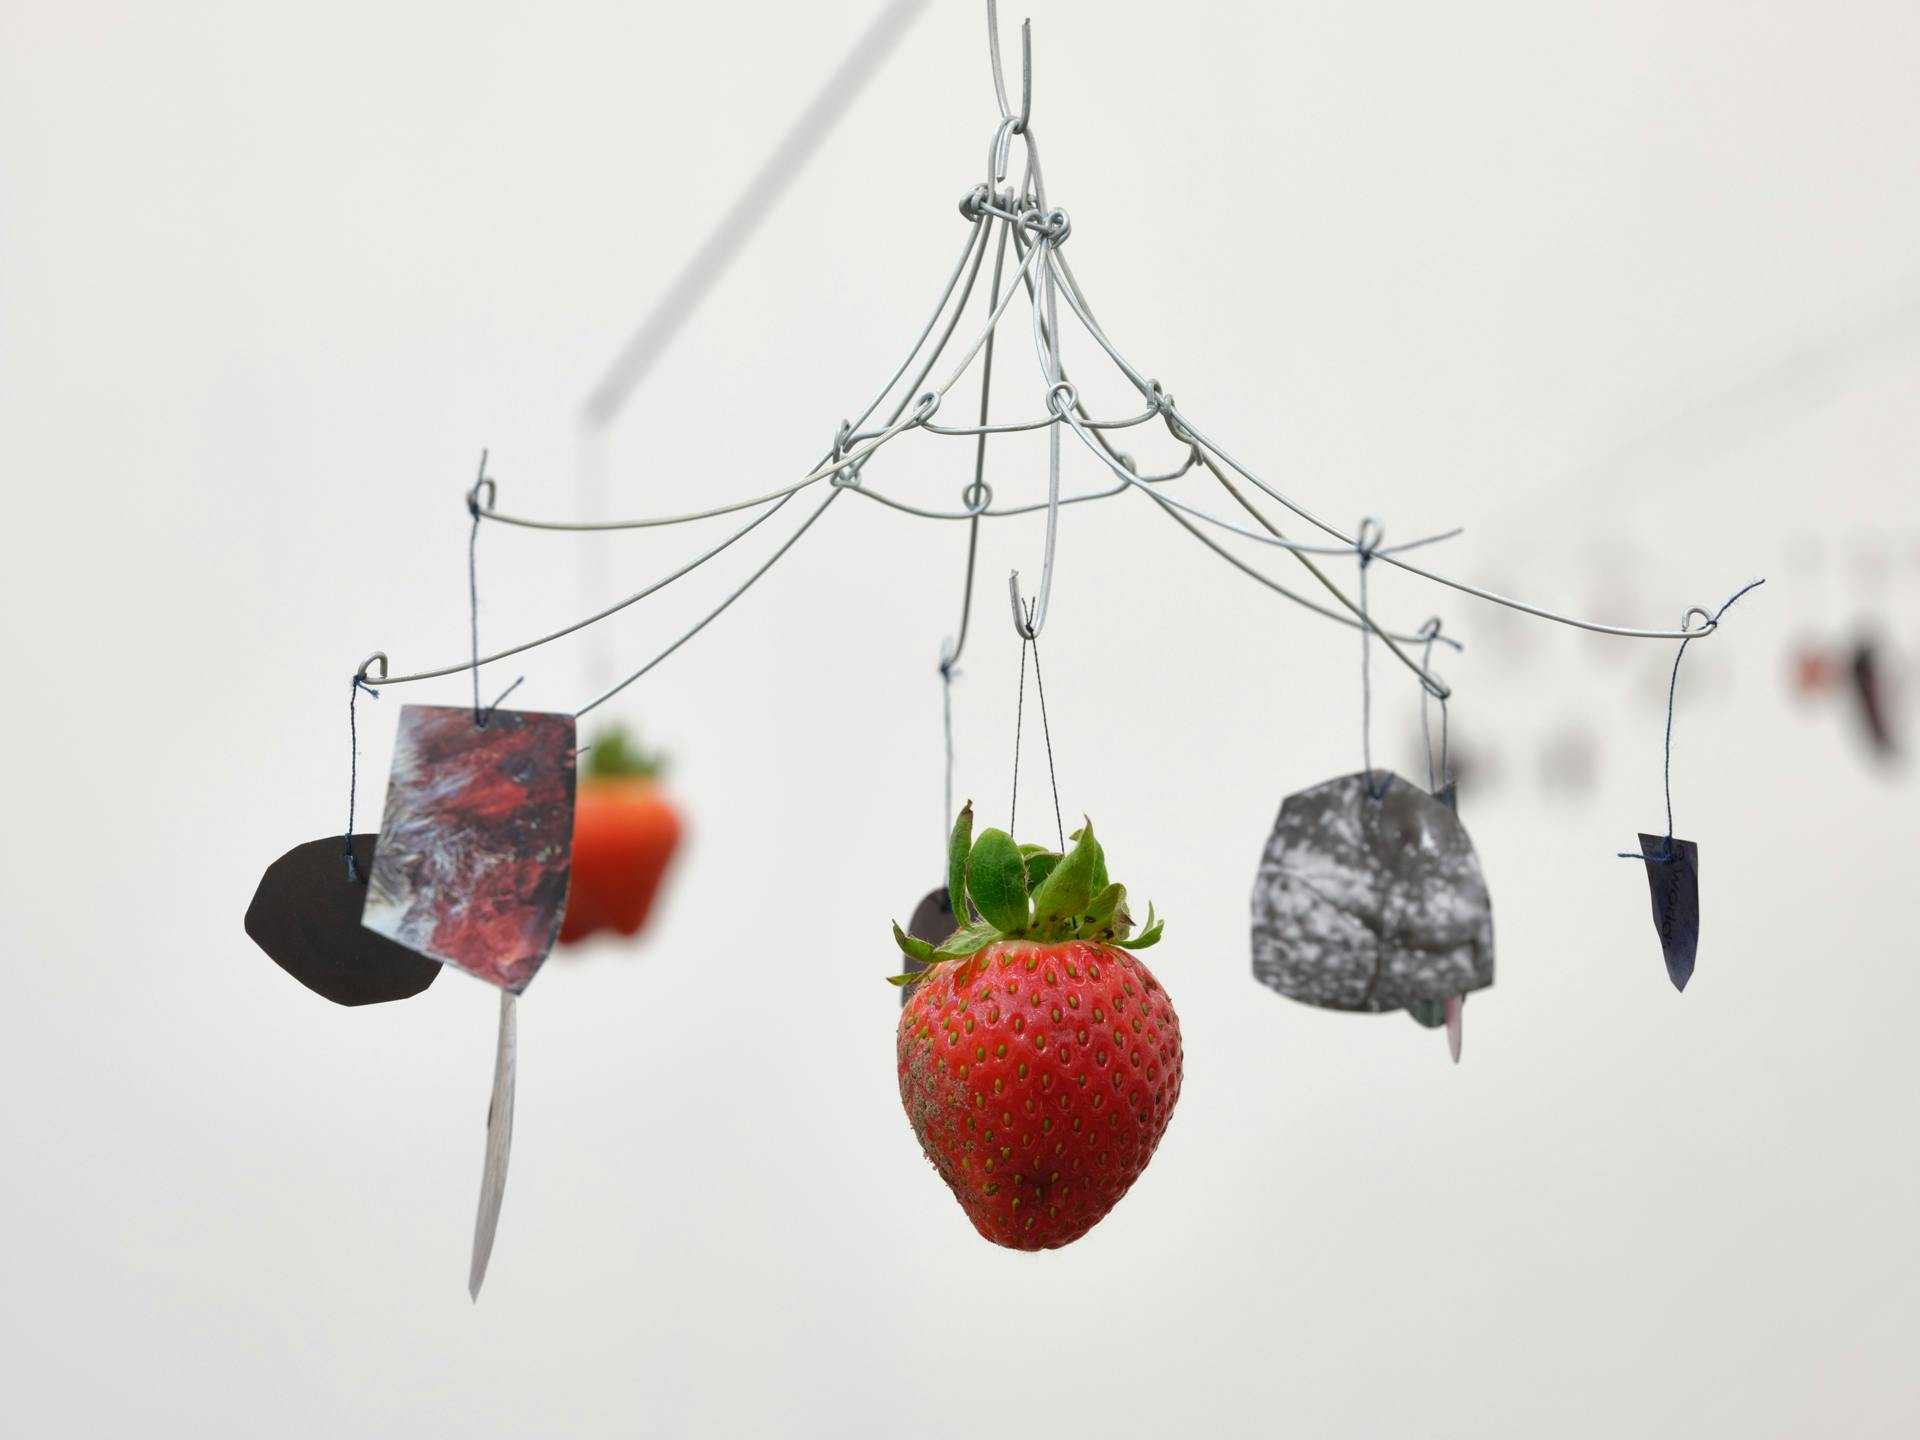 Paper cutouts and a strawberry hang from thin metal wires.